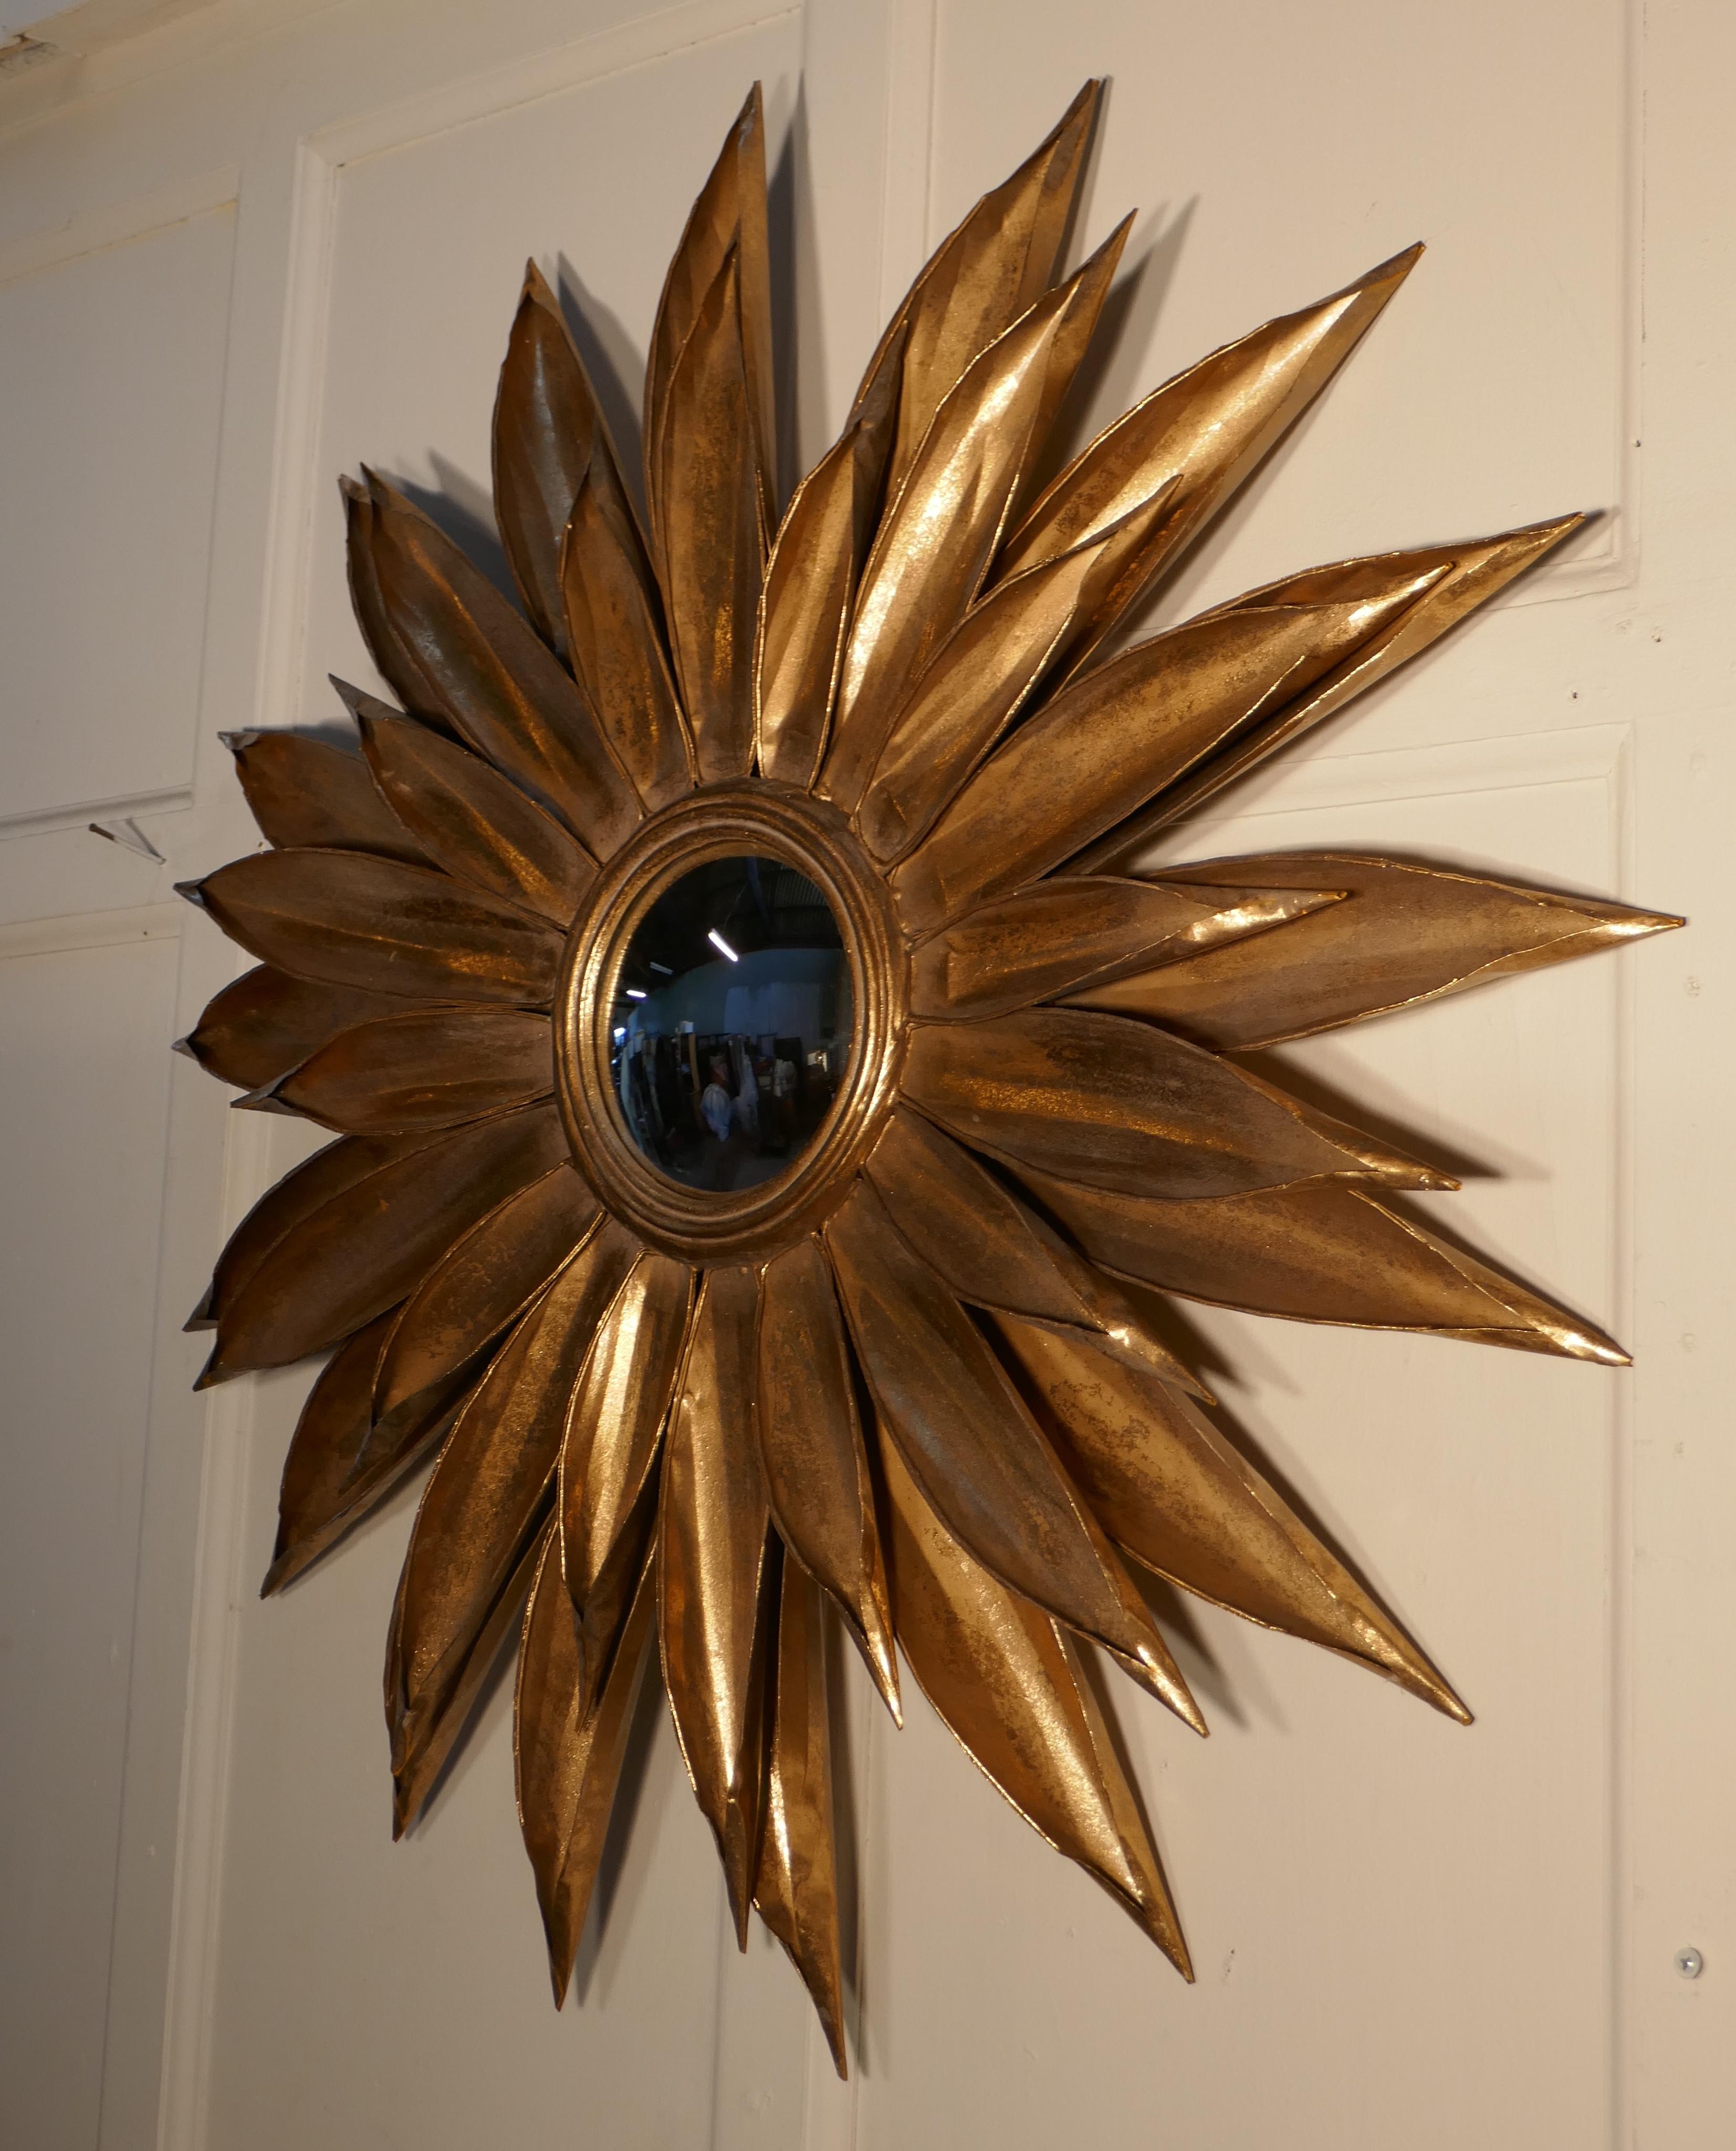 Large French Art Deco sunburst-starburst toleware convex gilt mirror

A superb piece, the large starburst or sunburst radiates out from the central convex mirror, the rays are in gold toleware, they take the form of large folded petals, in four